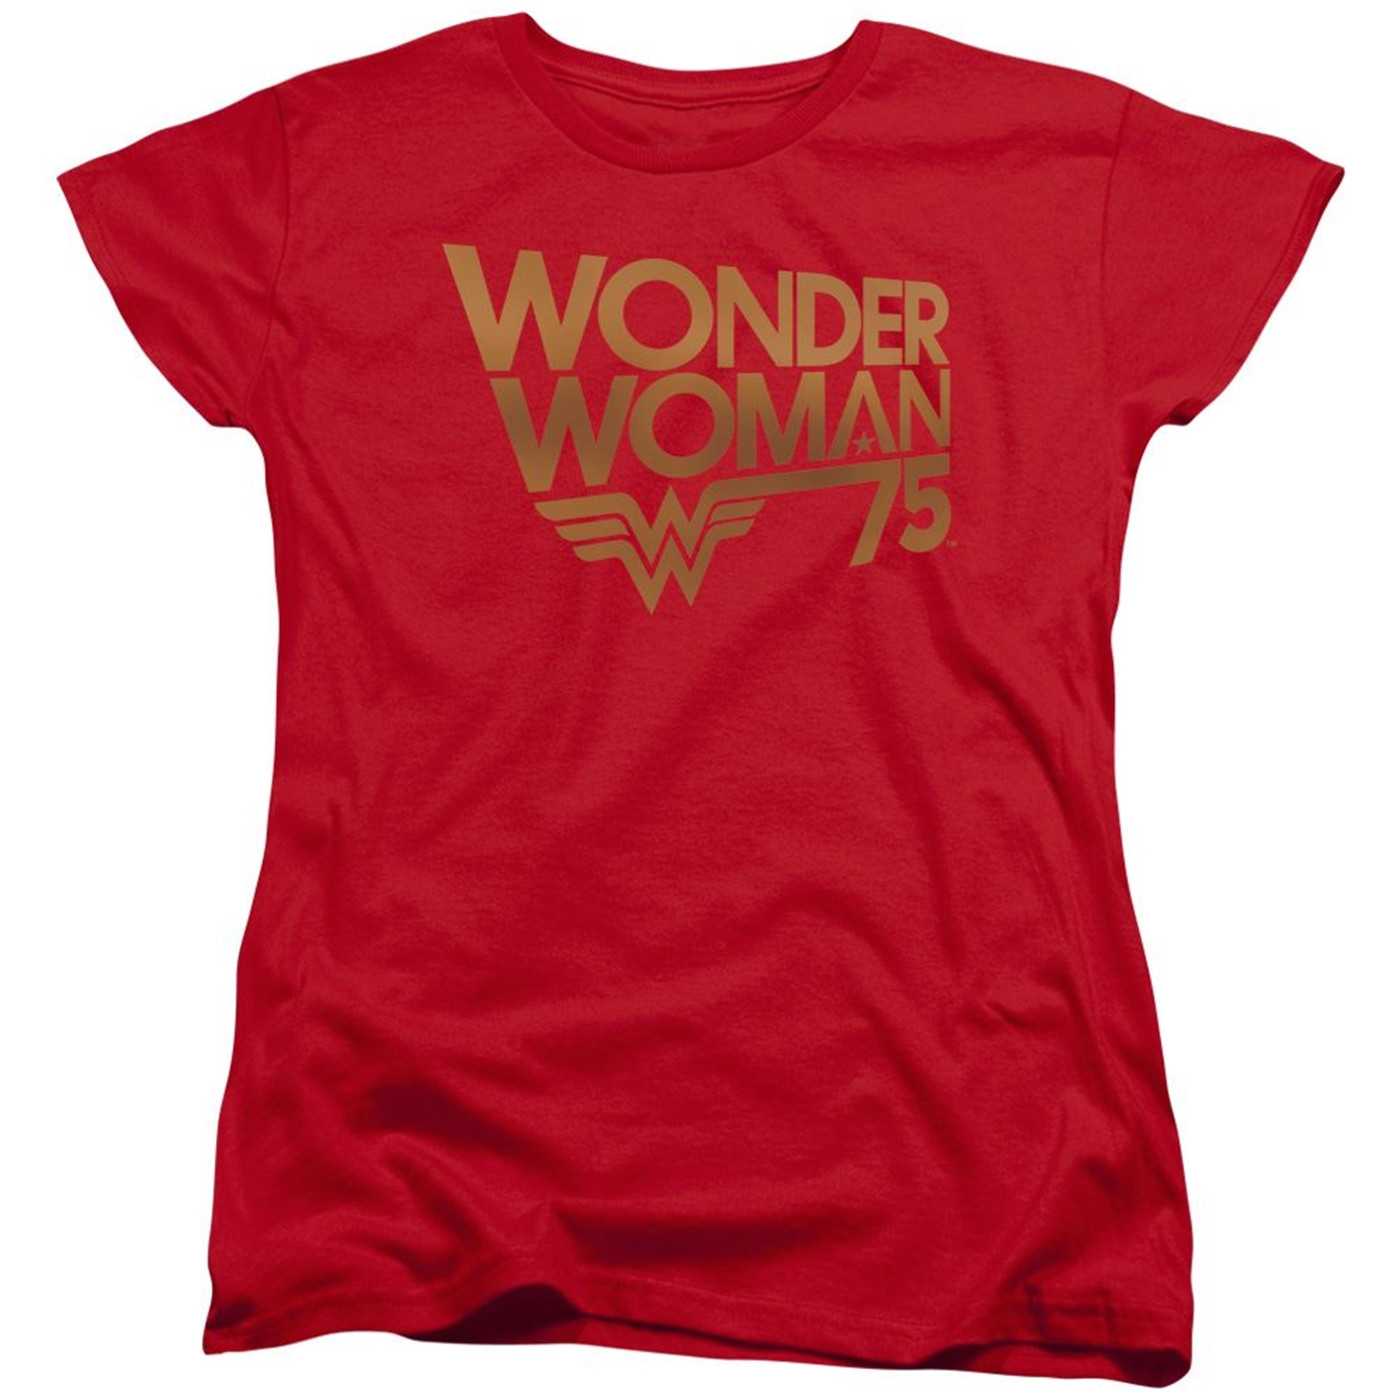 Wonder Woman 75 Red and Gold Women's T-Shirt